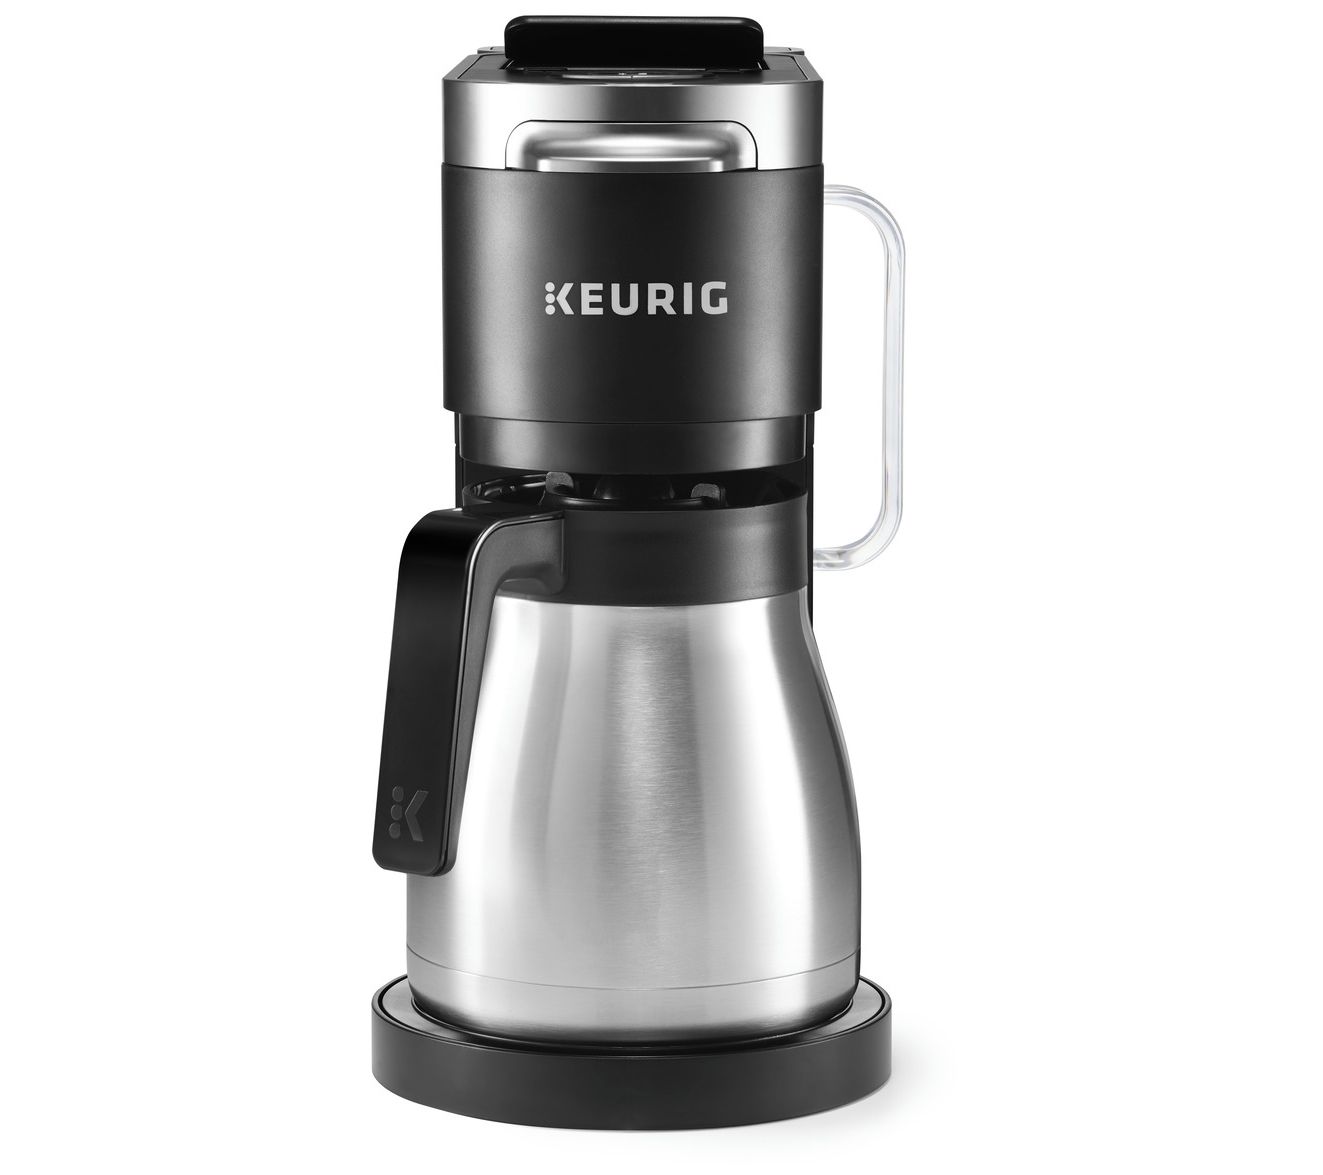 Keurig K-Duo Plus Review: A Simple But Solid Coffee Maker